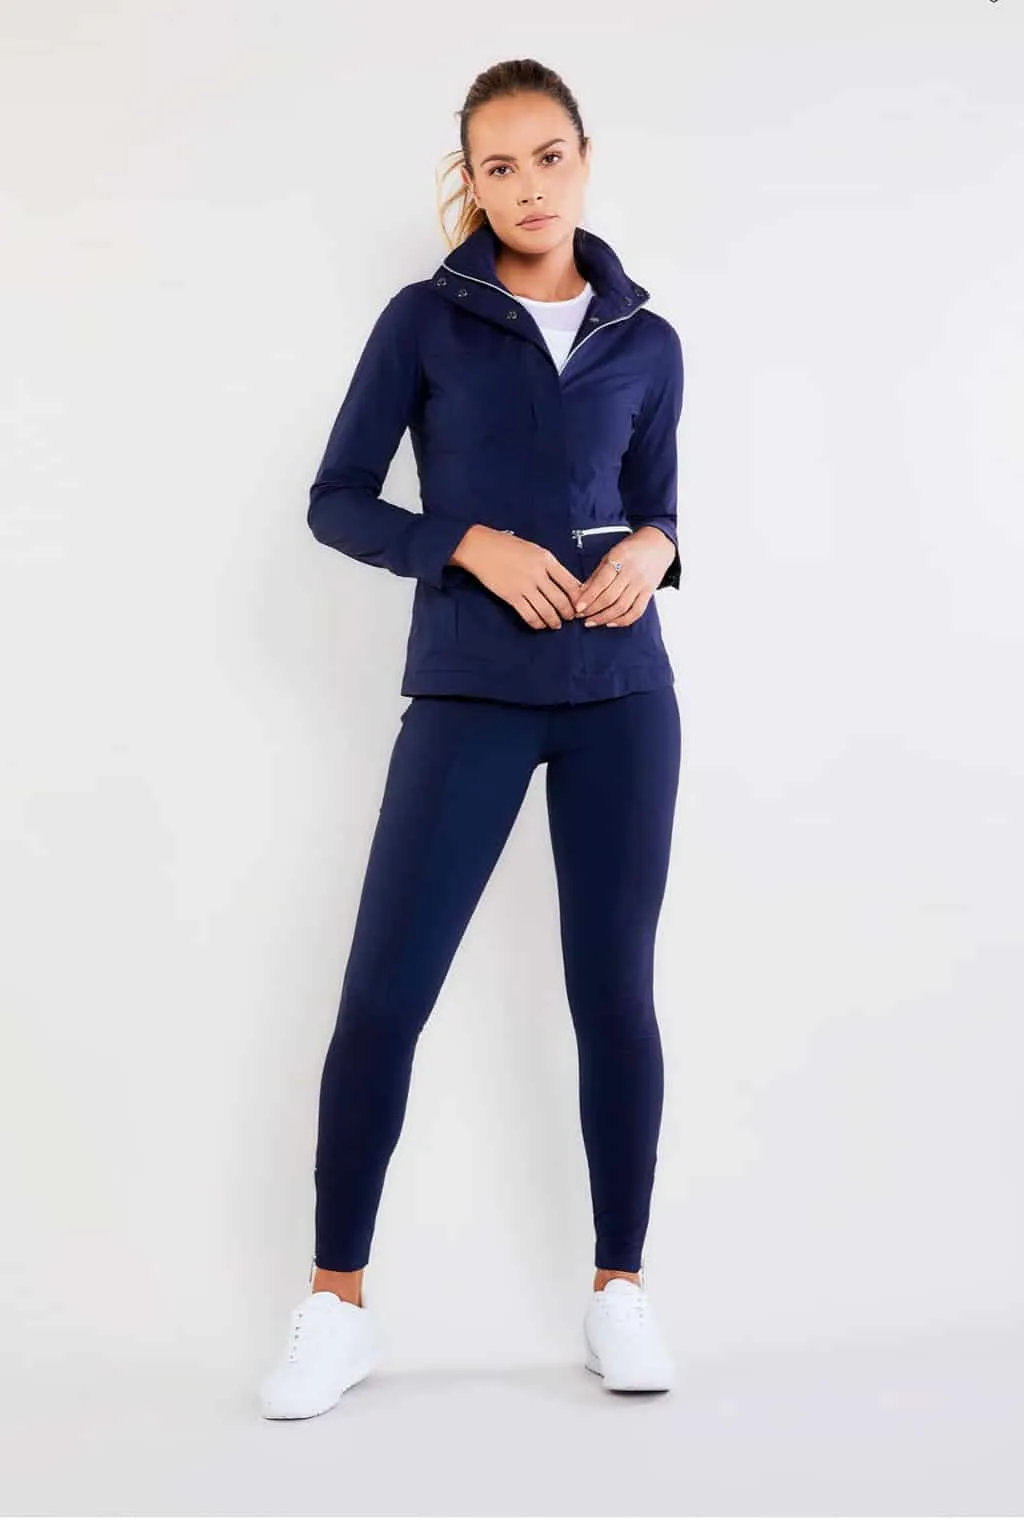 Young attractive woman modelling a navy blue travel outfit.